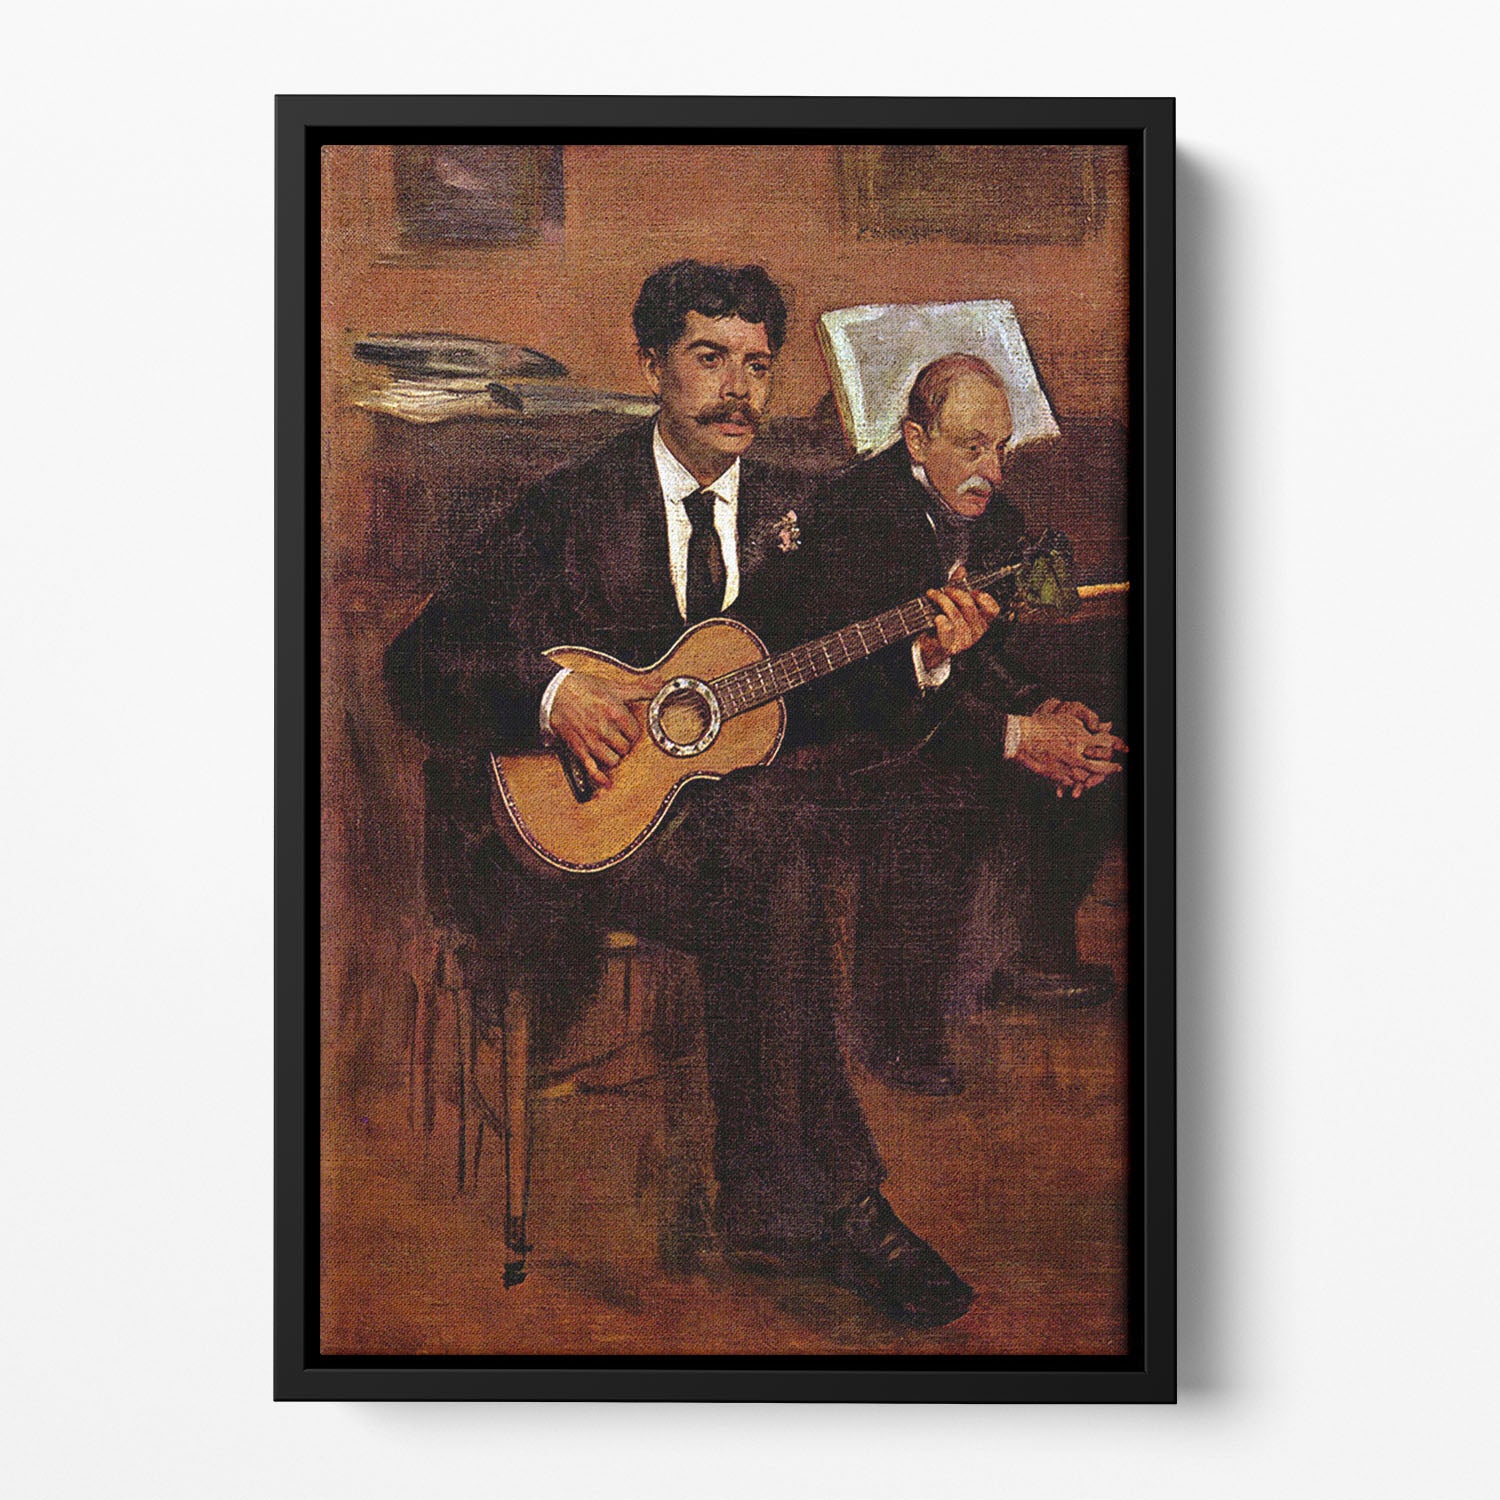 The guitarist Pagans and Monsieur Degas by Degas Floating Framed Canvas